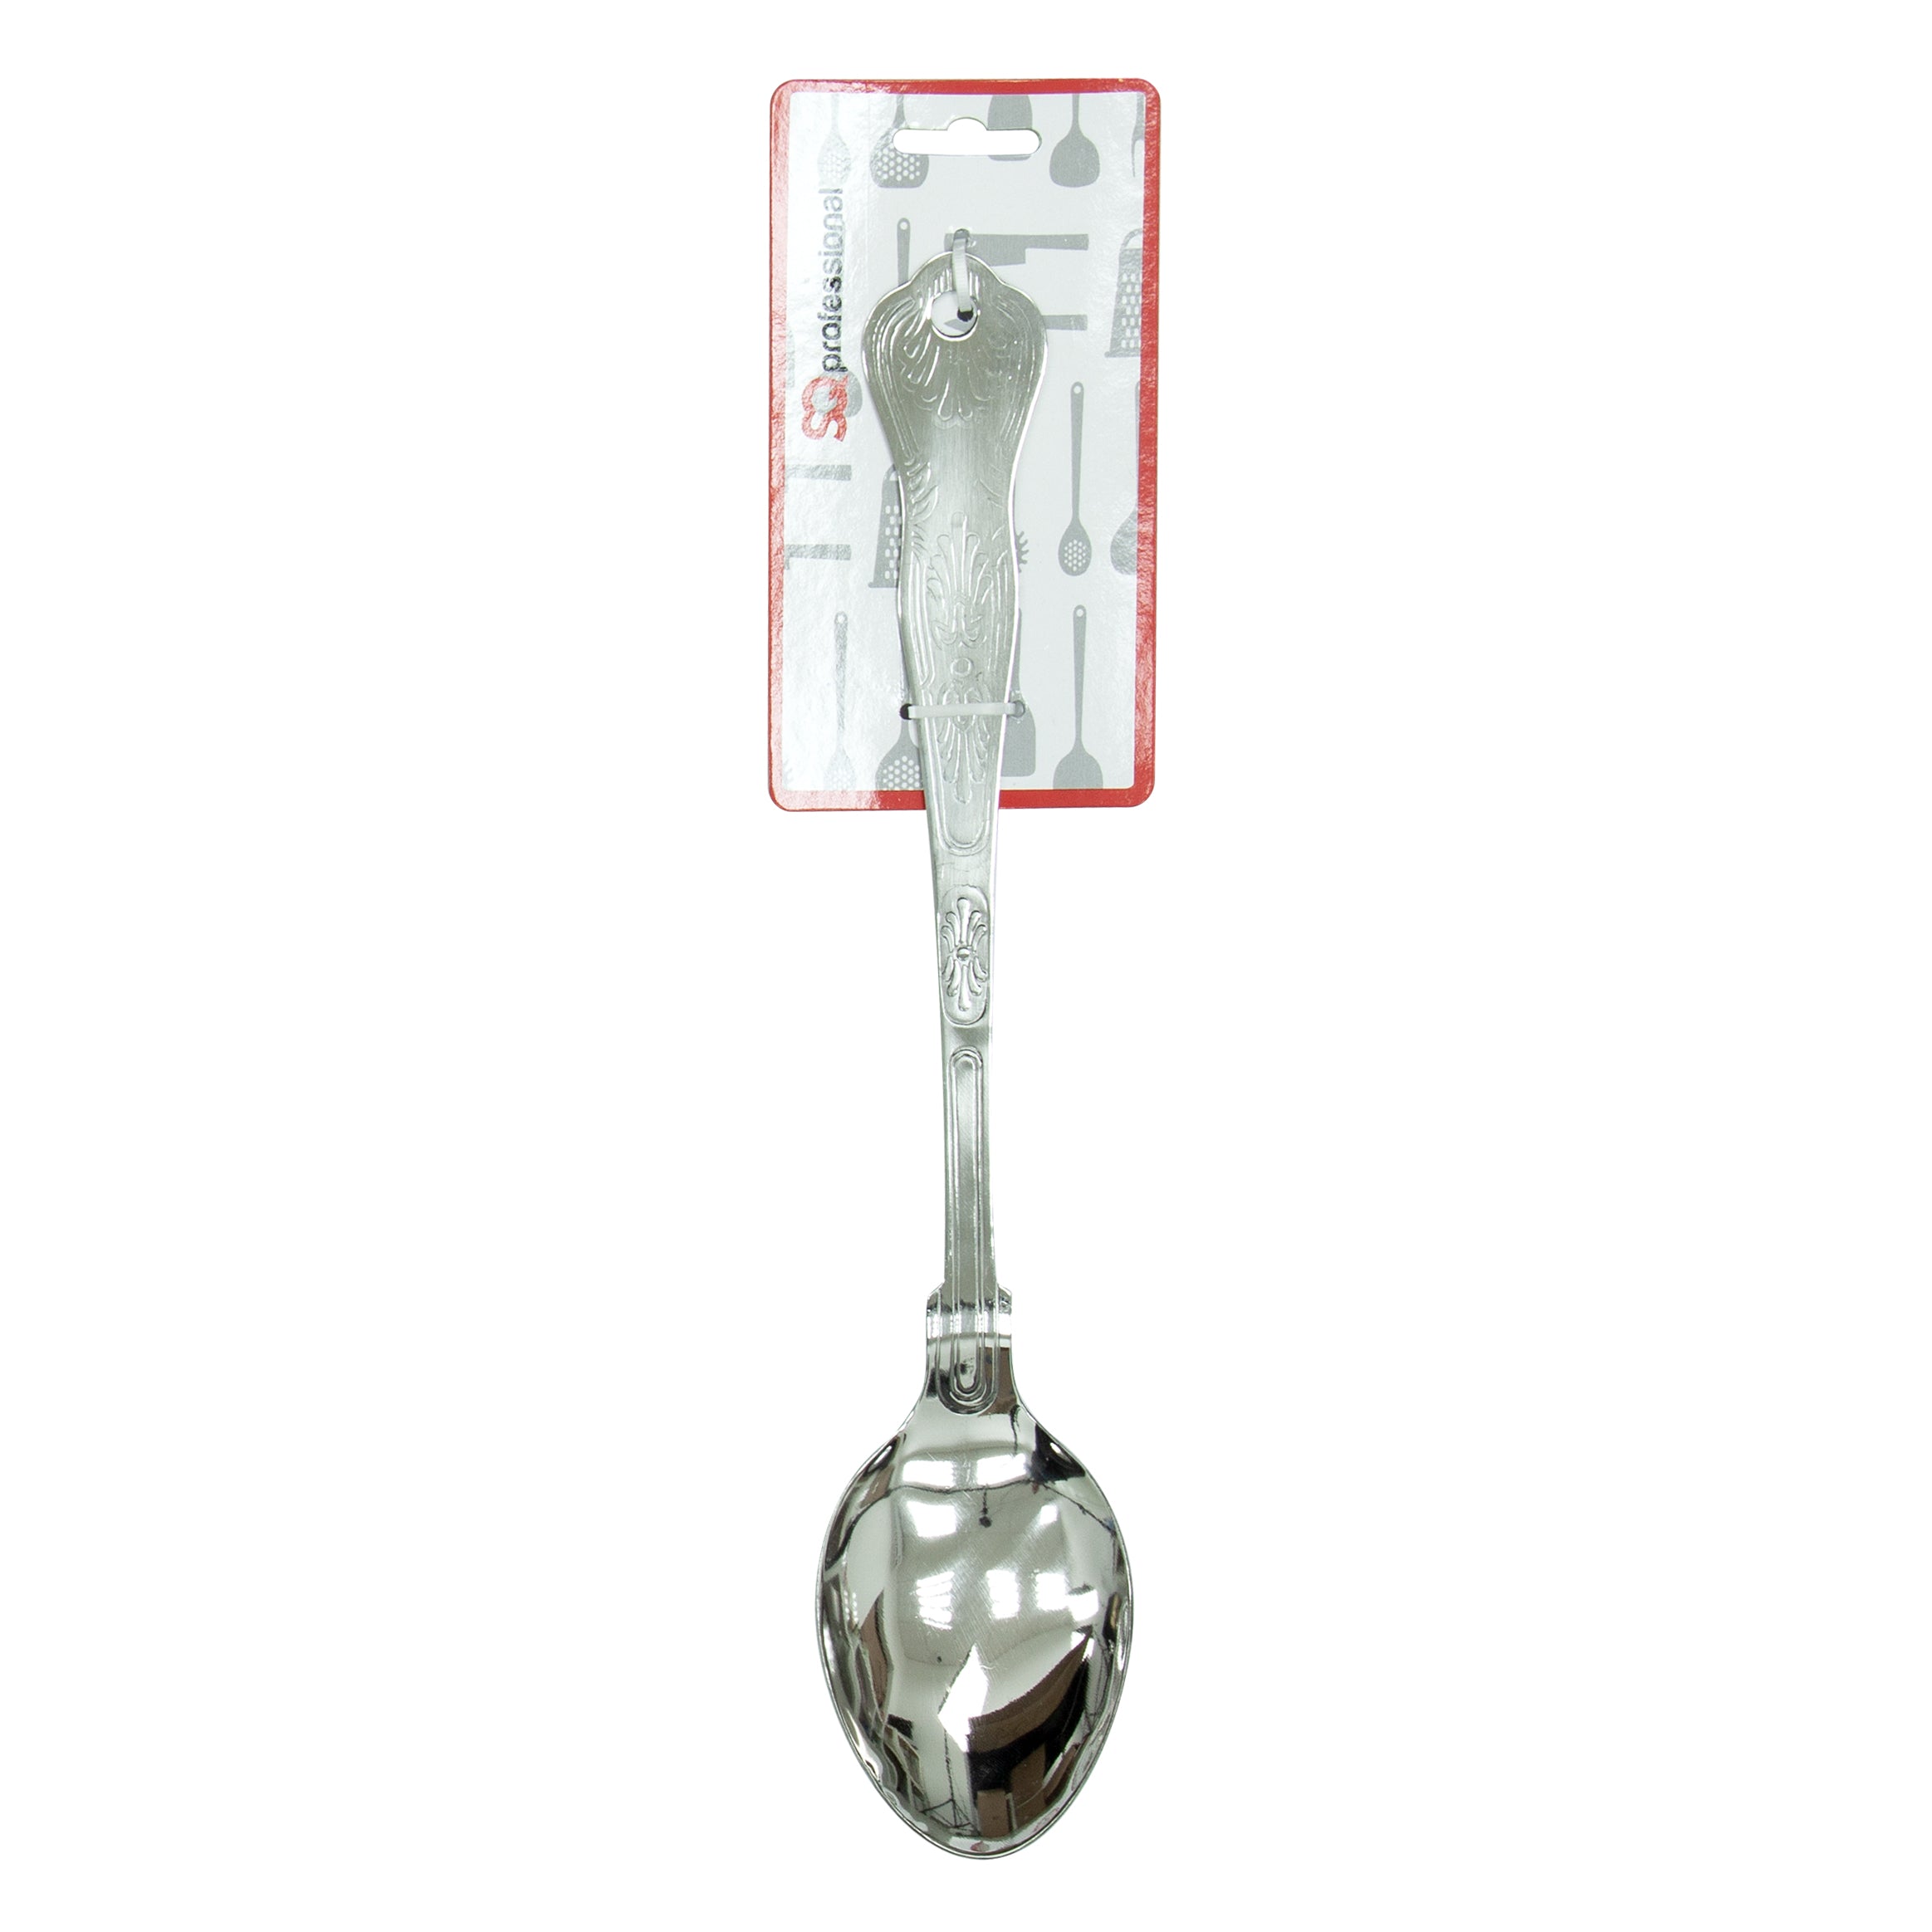 Stainless Steel Serving Spoon - 14 inch